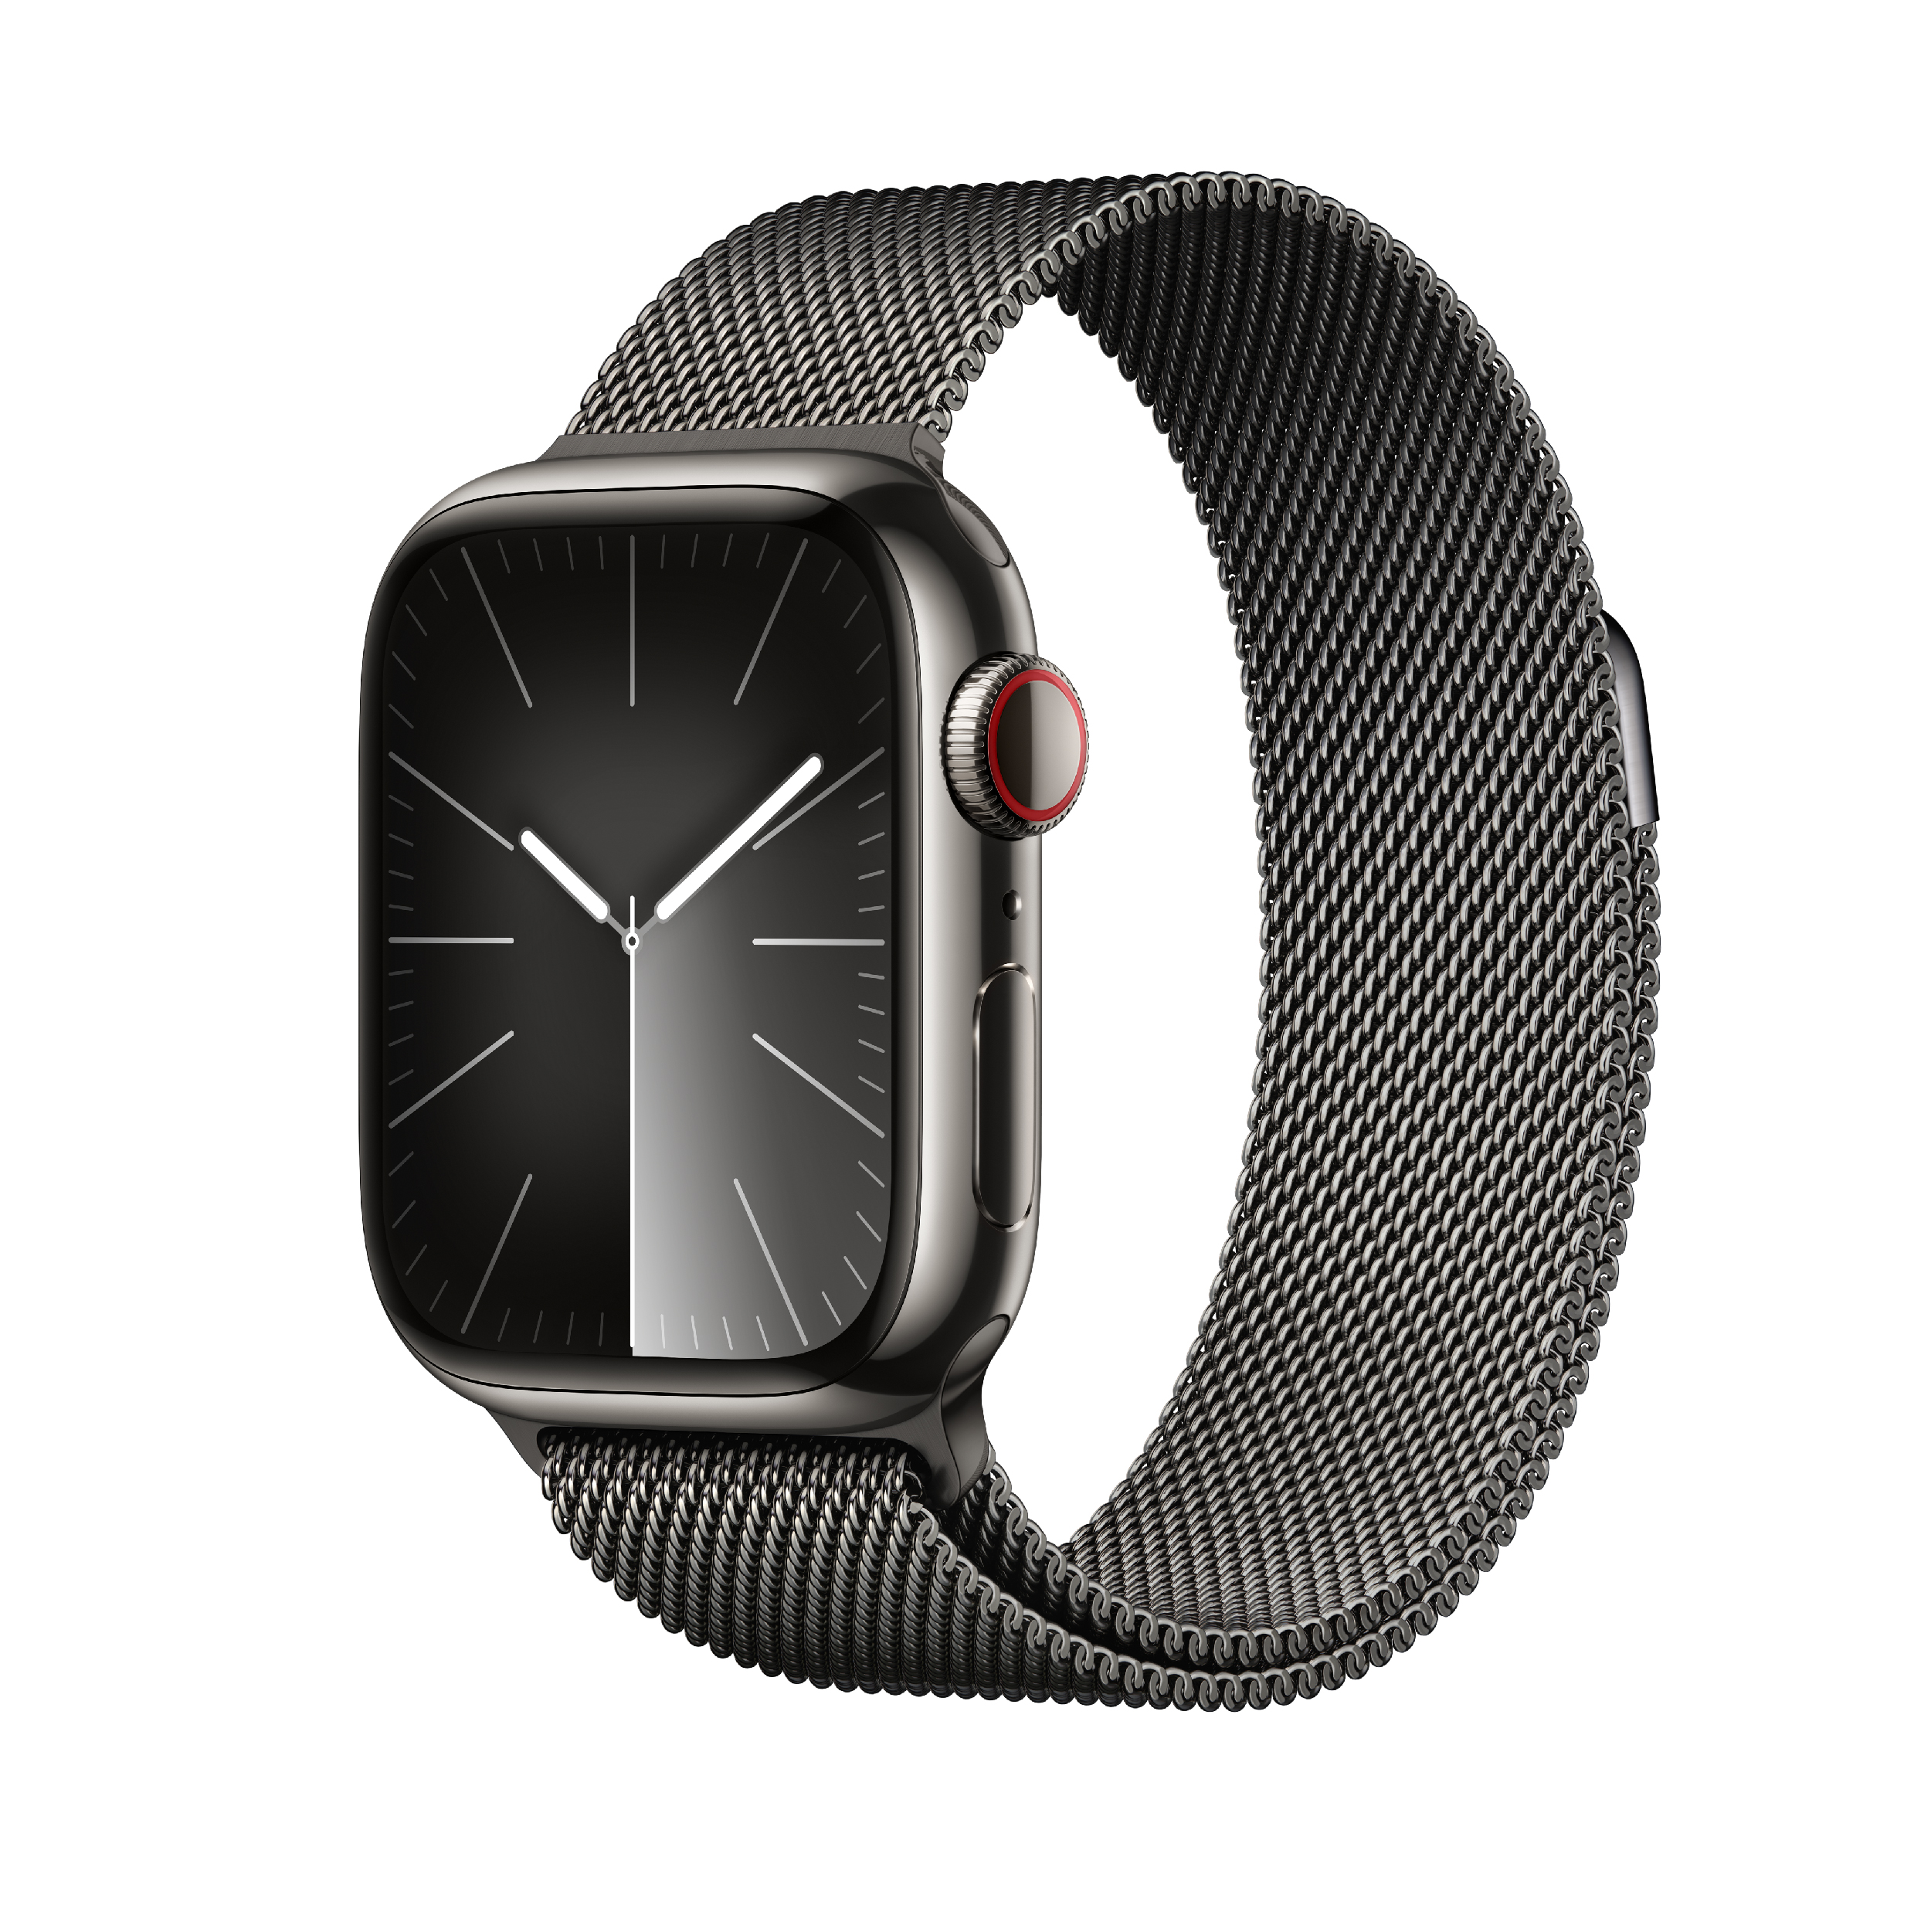 APPLE Smartwatch Series 9 GPS + Cellular 45 mm,Graphite Stainless Steel with Graphite Milanese Loop Strap | Apple| Image 2